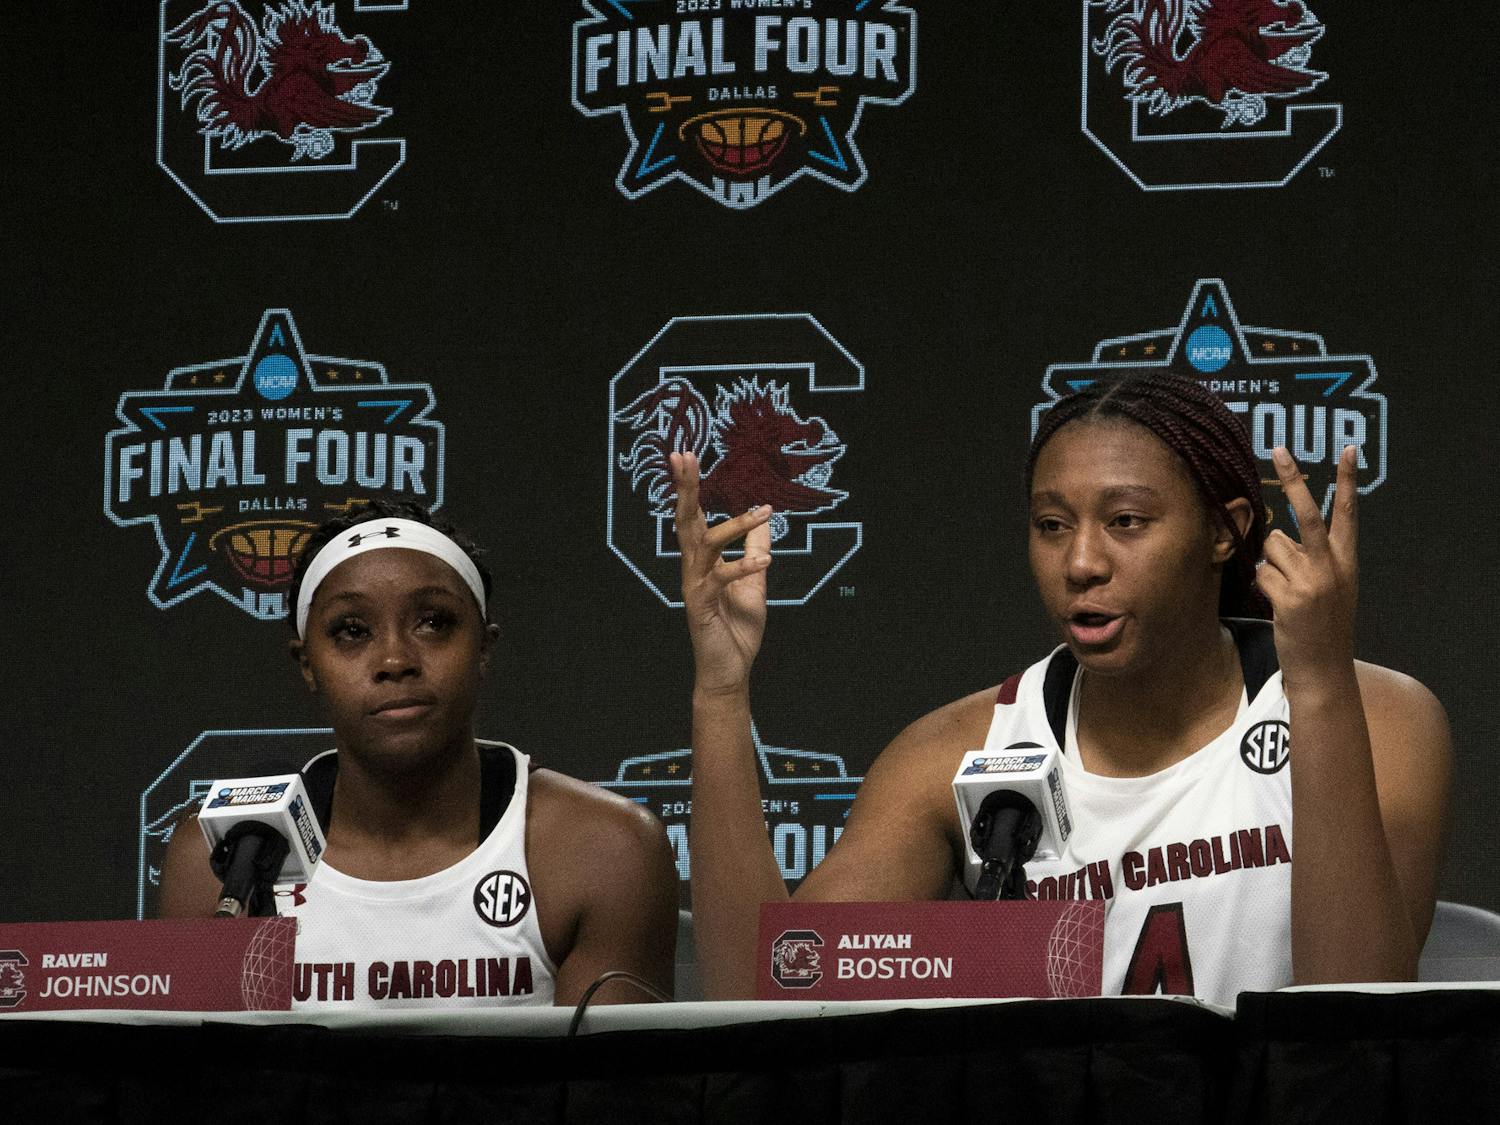 Senior forward Aliyah Boston and redshirt freshman guard Raven Johnson share their post-game thoughts and feelings about the Women’s Final Four match against Iowa on March 31, 2023. The Gamecocks lost to the Hawkeyes 77-73, ending its 42-game winning streak.&nbsp;